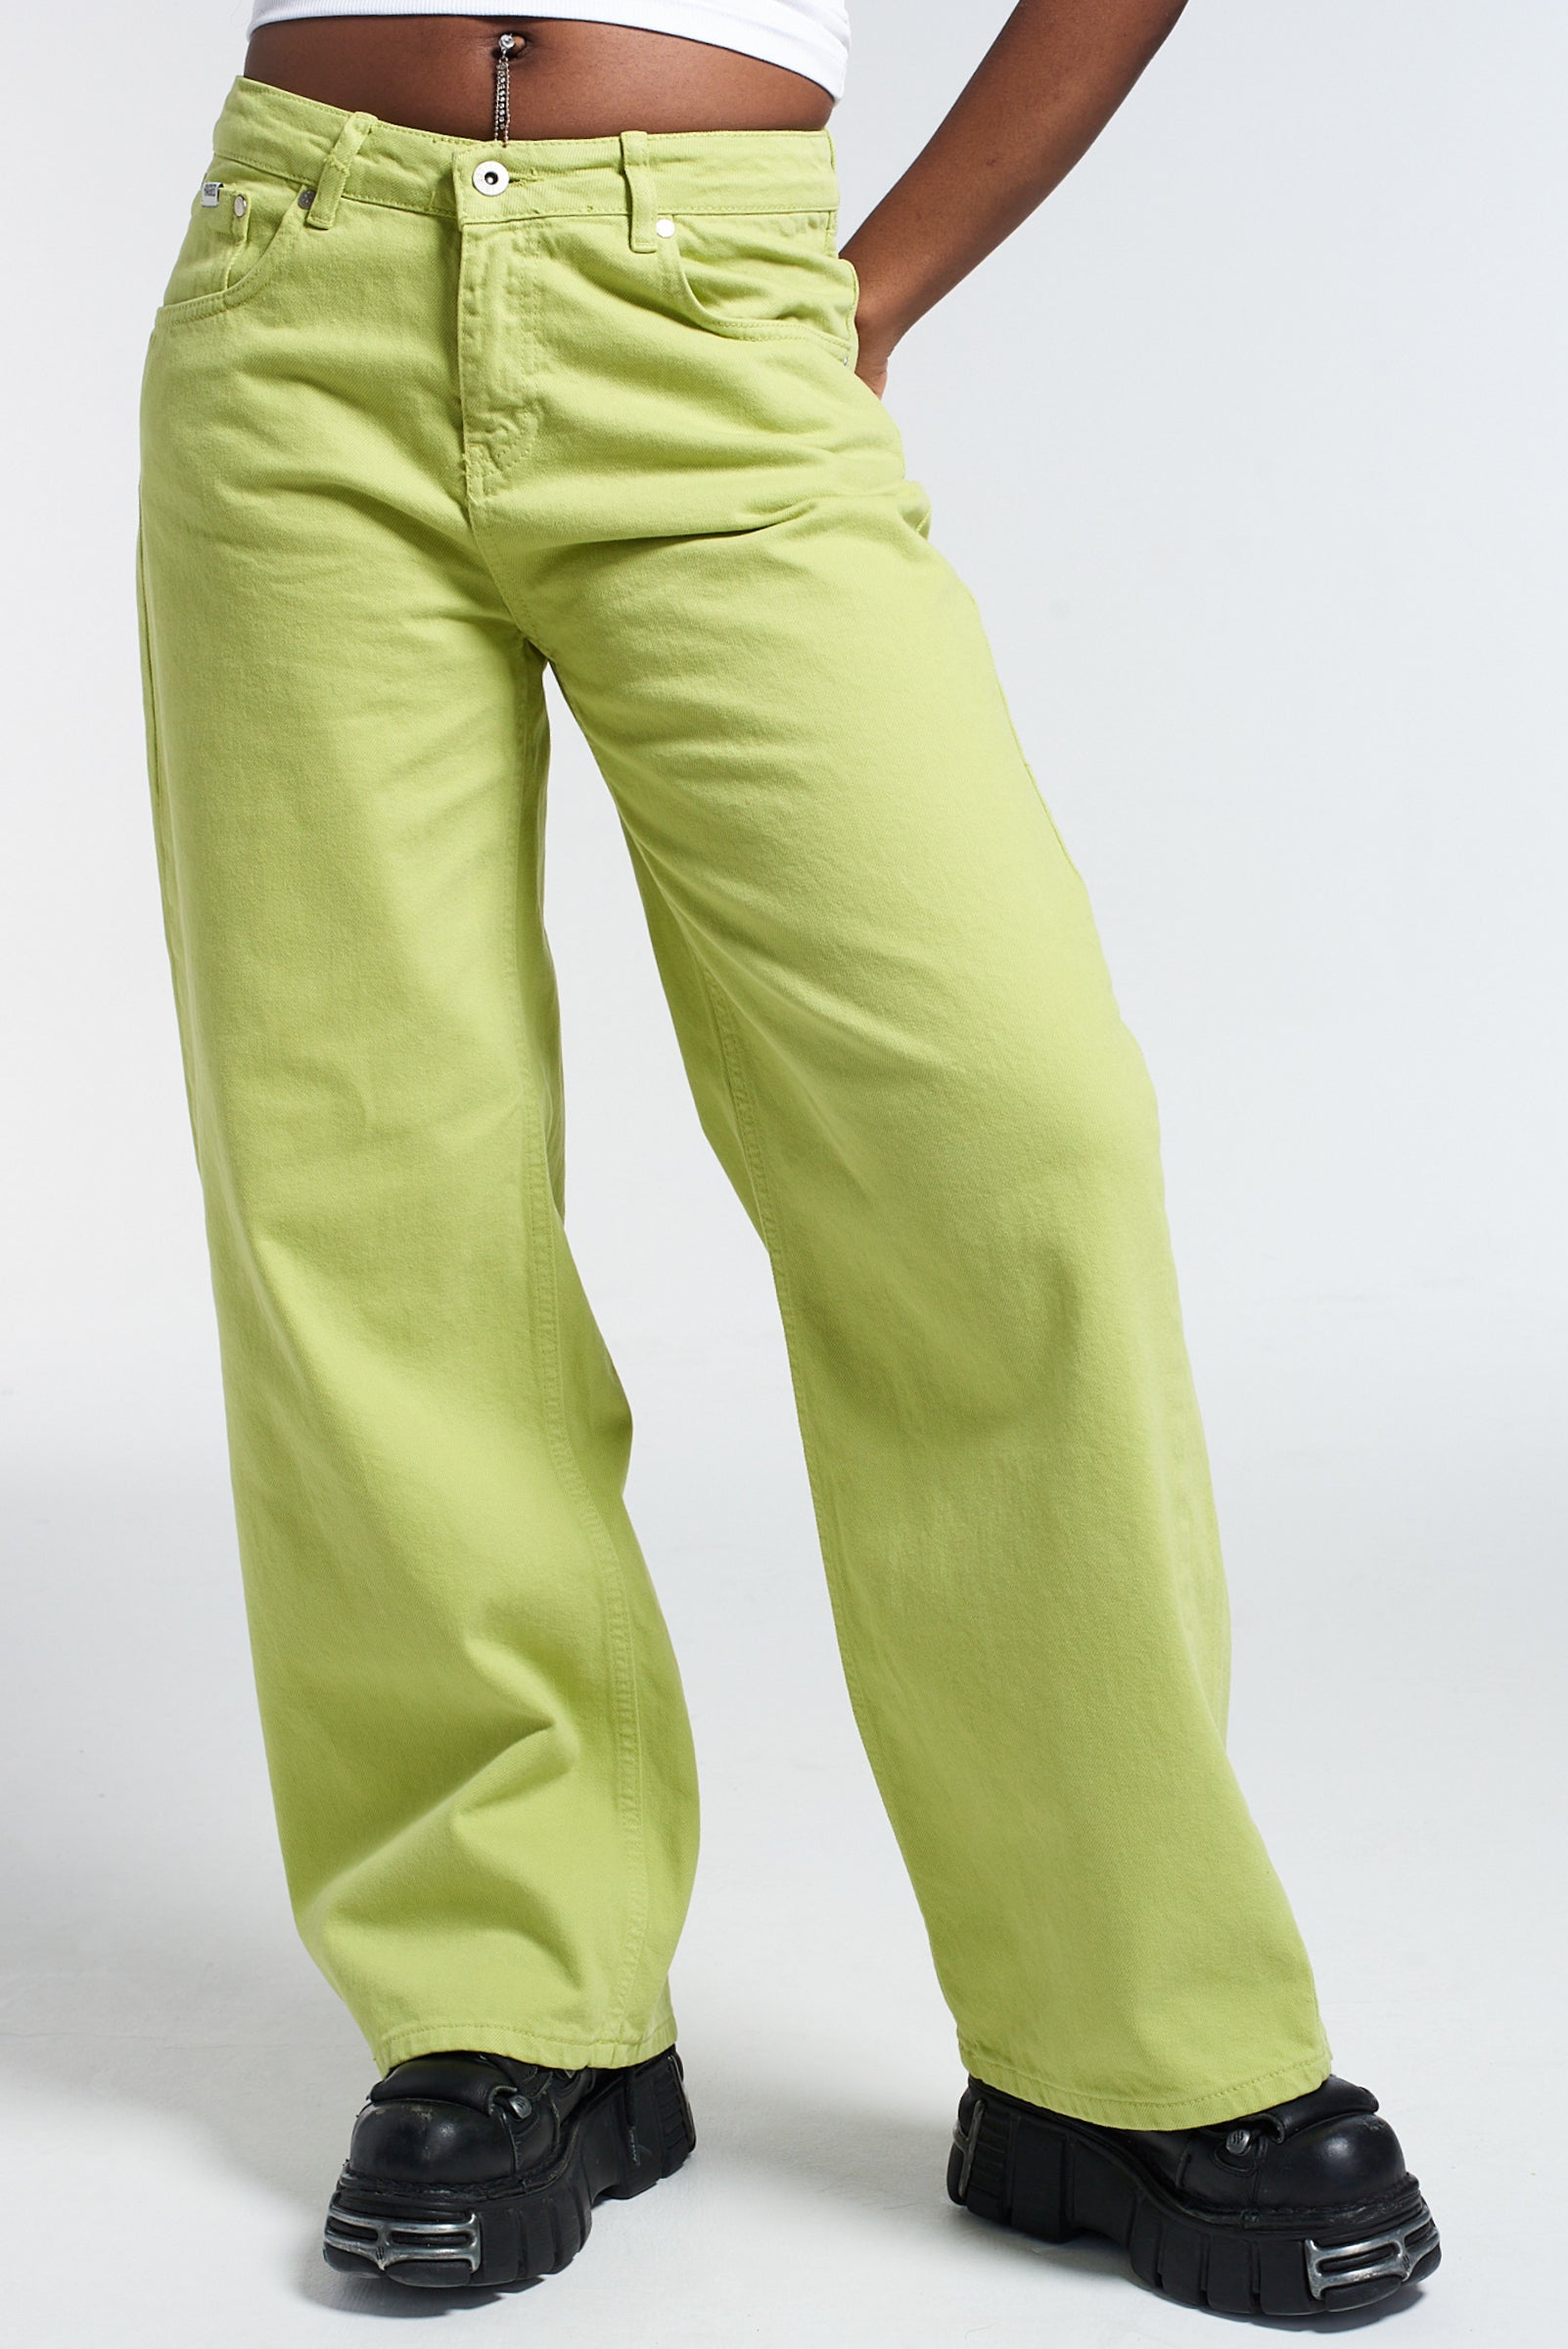 Lime Green Pants -  Canada